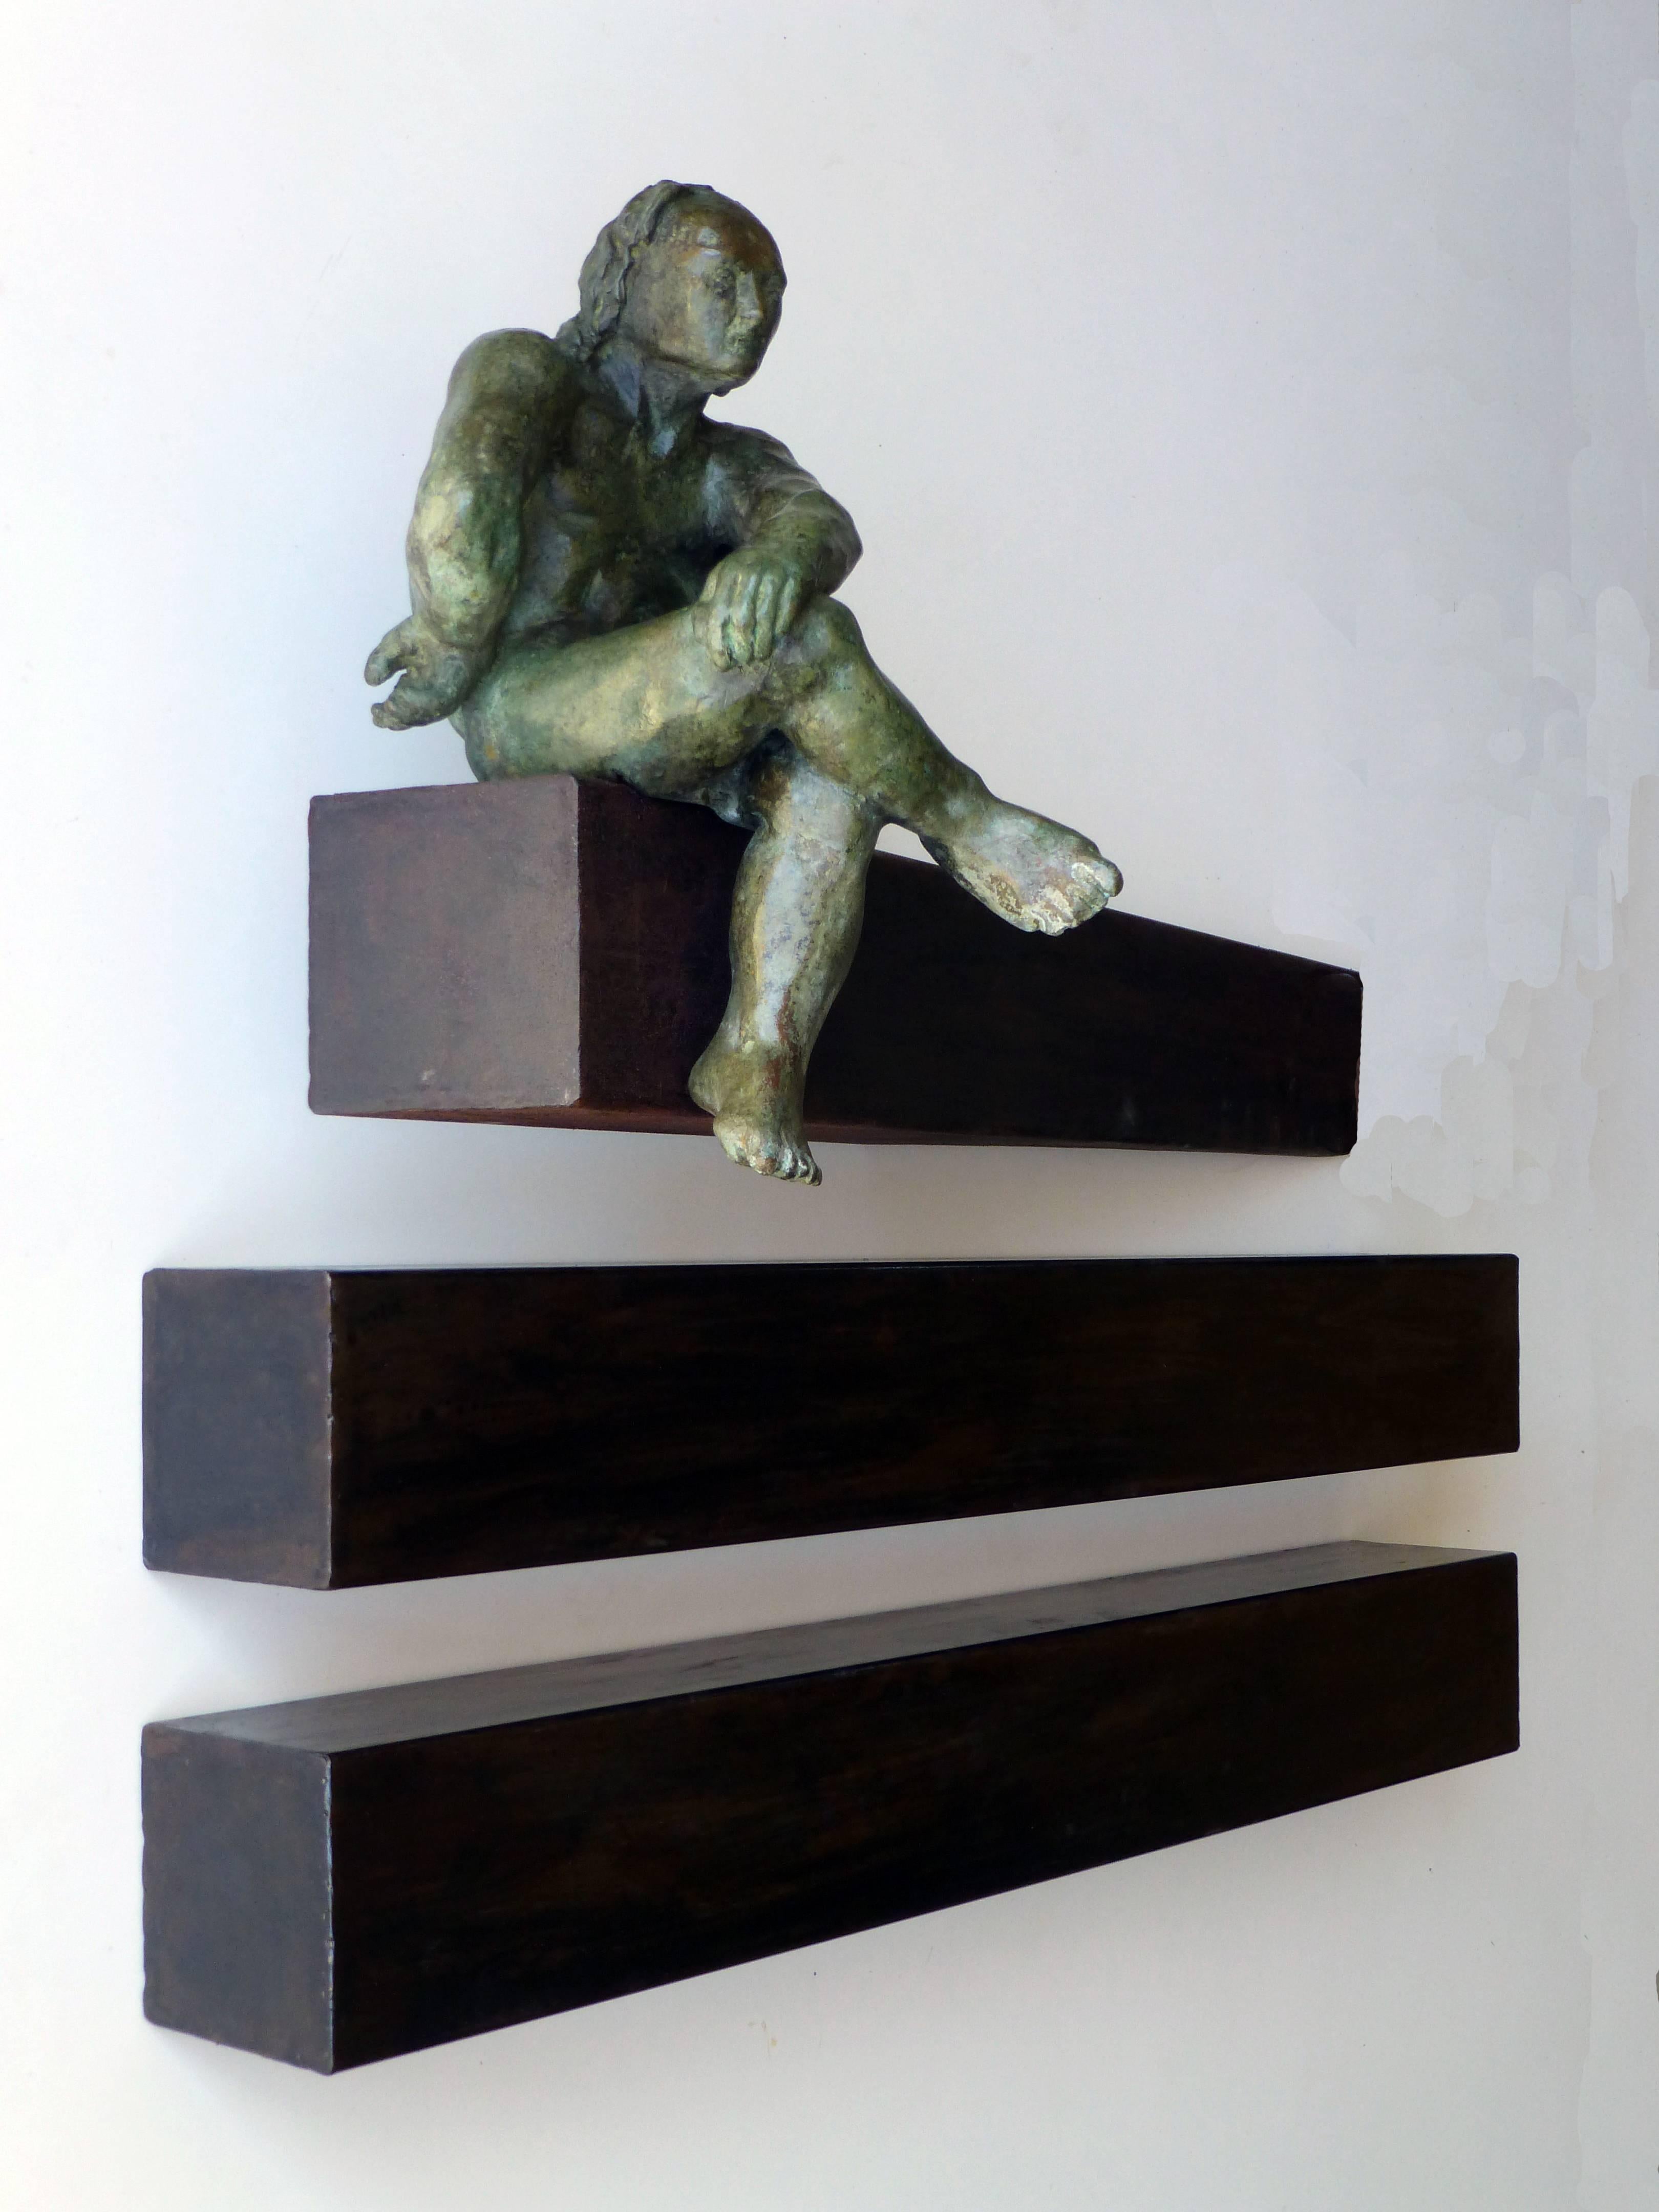 Sculpture by the Spanish artist AMANCIO GONZALEZ
bronze.
The length of the horizontal bars can be modified to your liking
Fantastic piece of art representing Spanish sculpture
Very popular artist in Europe and Latin America
AMANCIO Gonzalez ( Leon